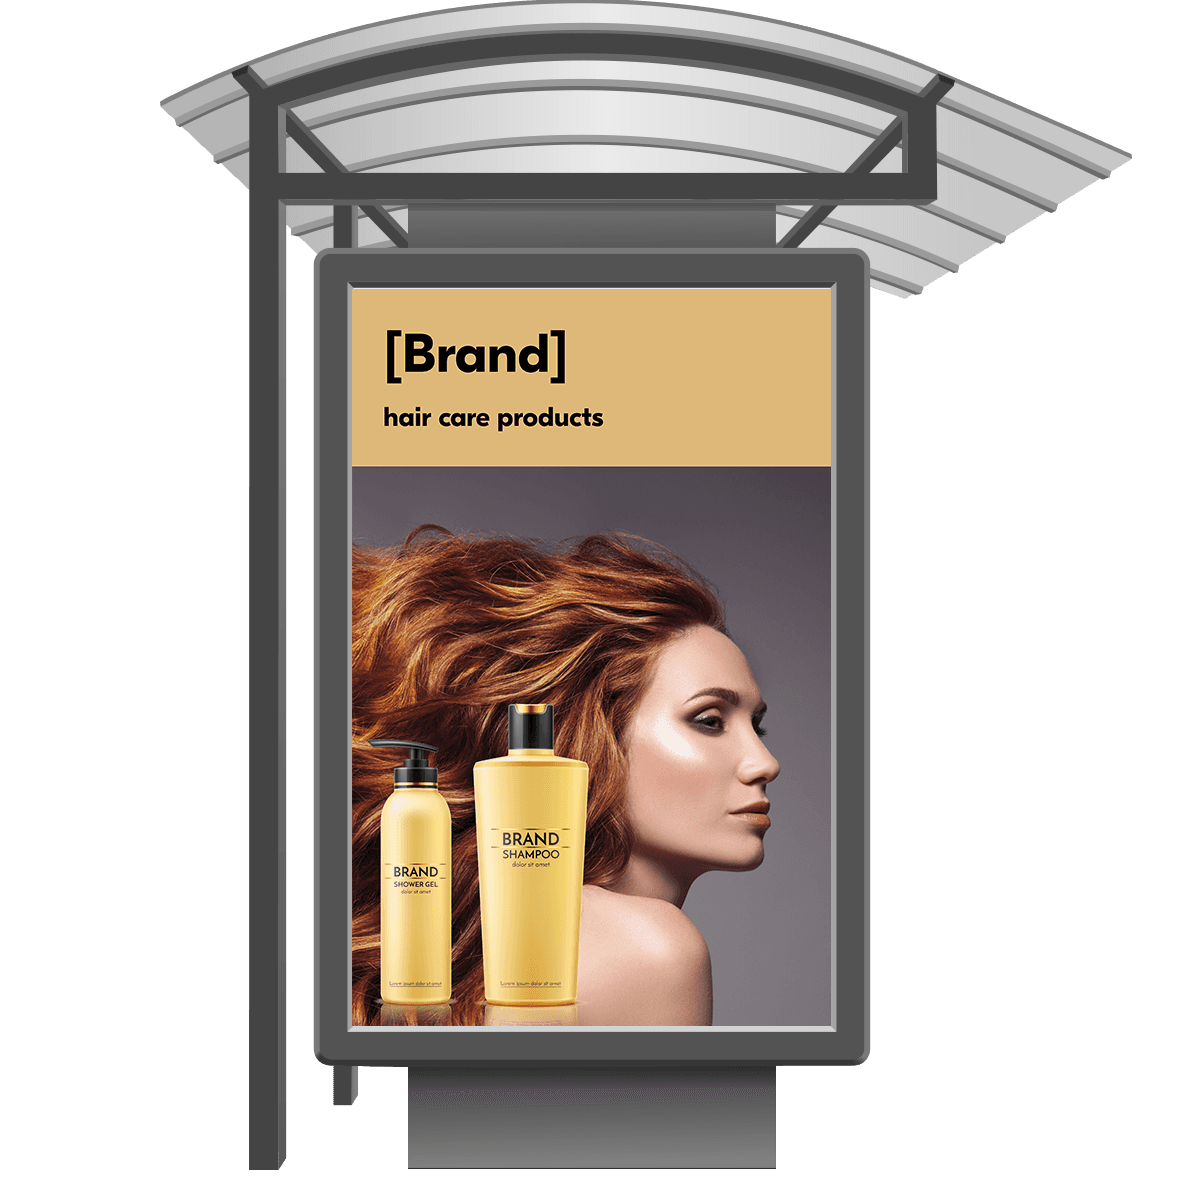 A bus stop advertisement for shampoo and shower gel, featuring a model with flowing red hair. 